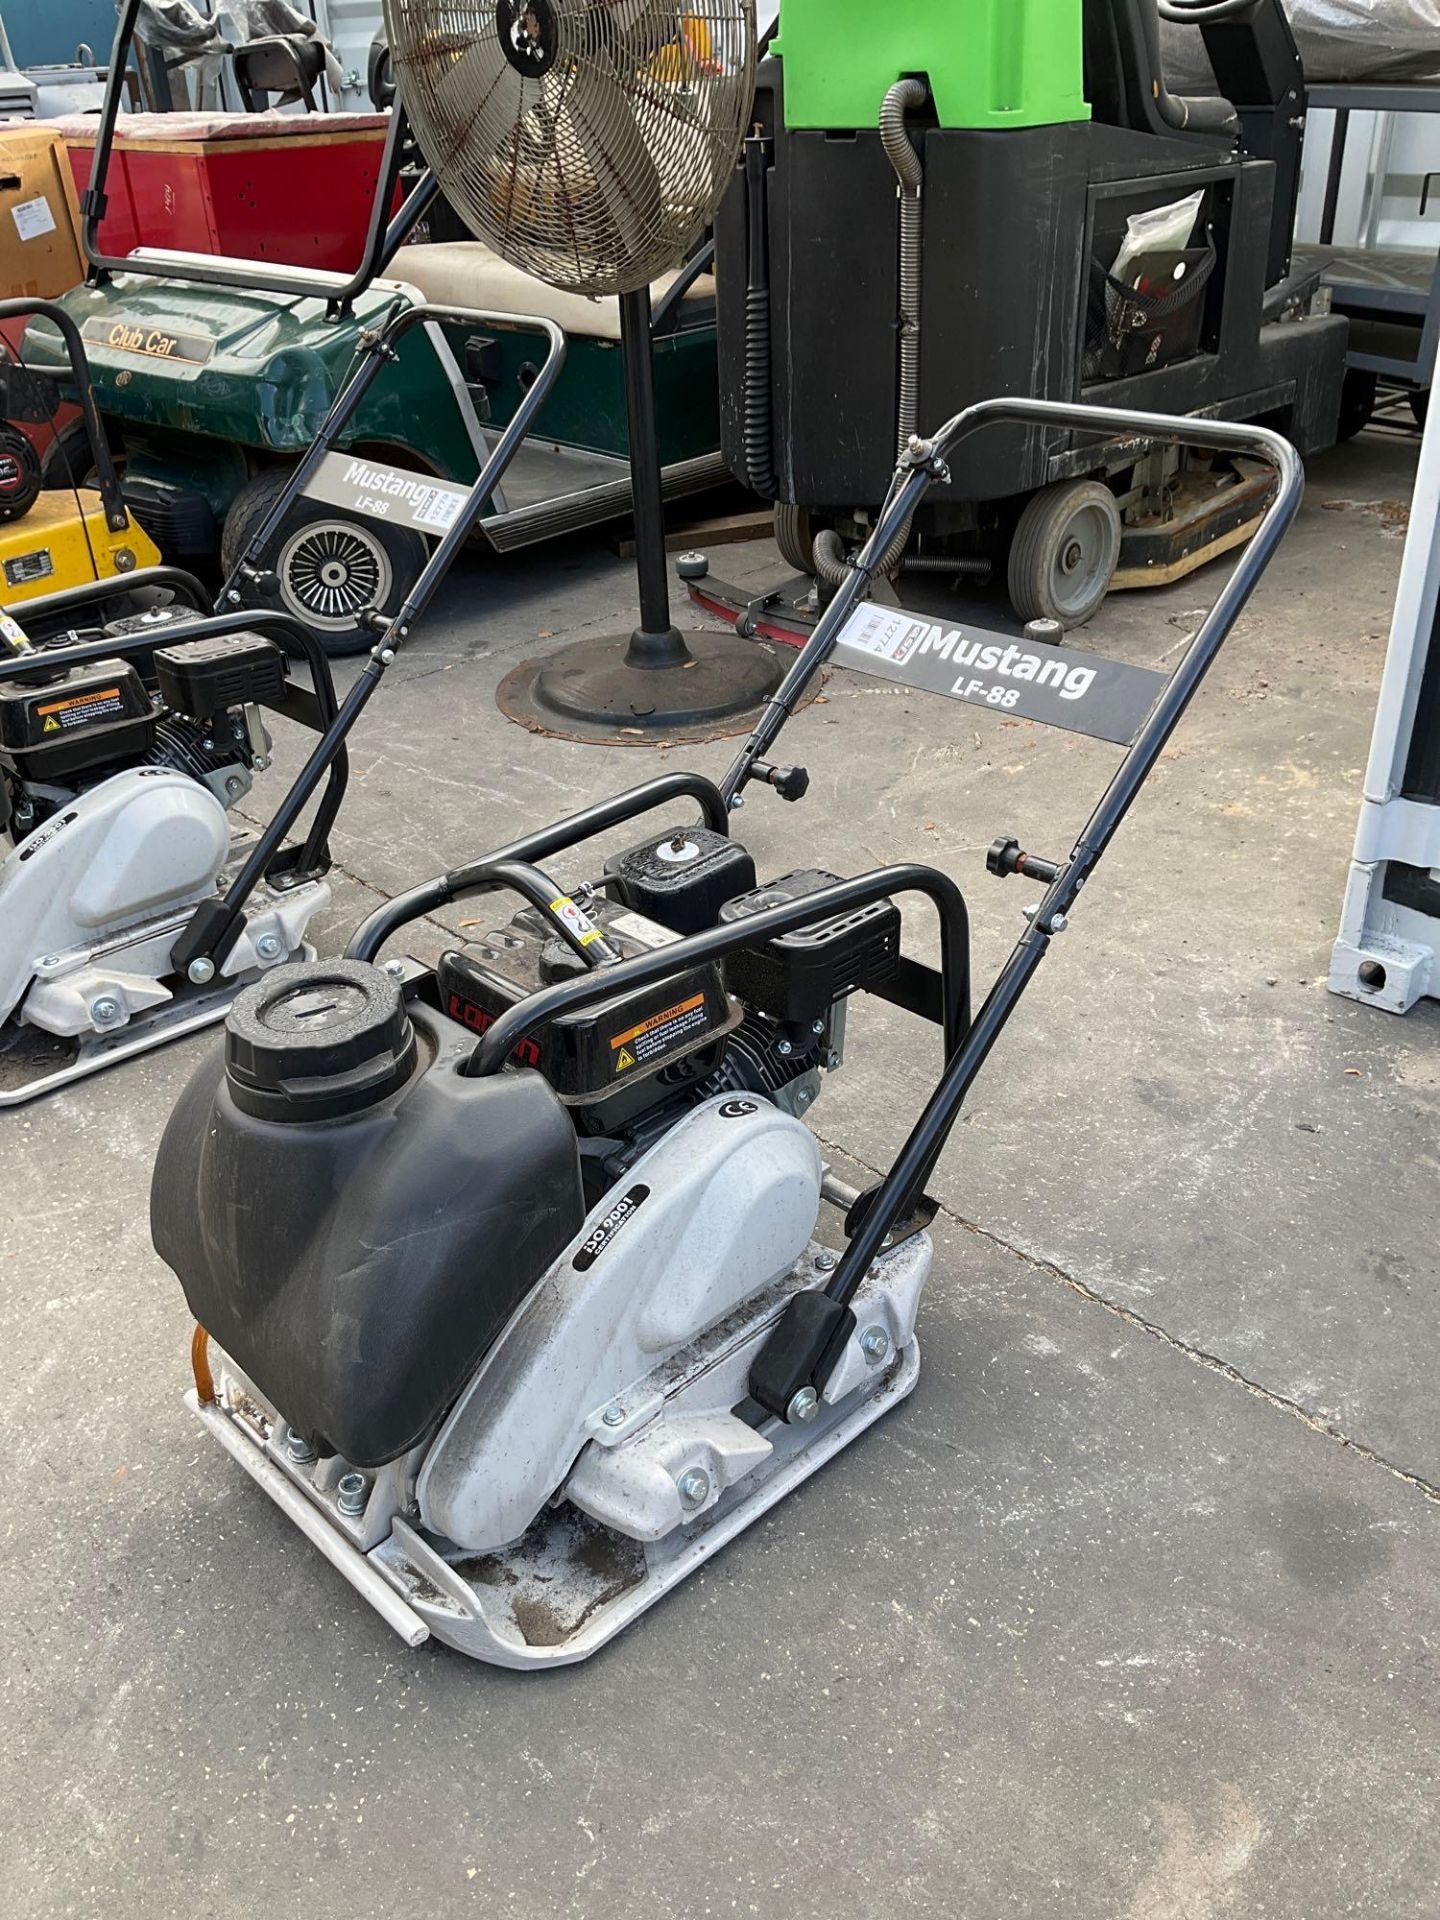 UNUSED MUSTANG LF-88 PLATE COMPACTOR WITH LONCIN 196cc ENGINE, GAS POWERED - Image 6 of 7